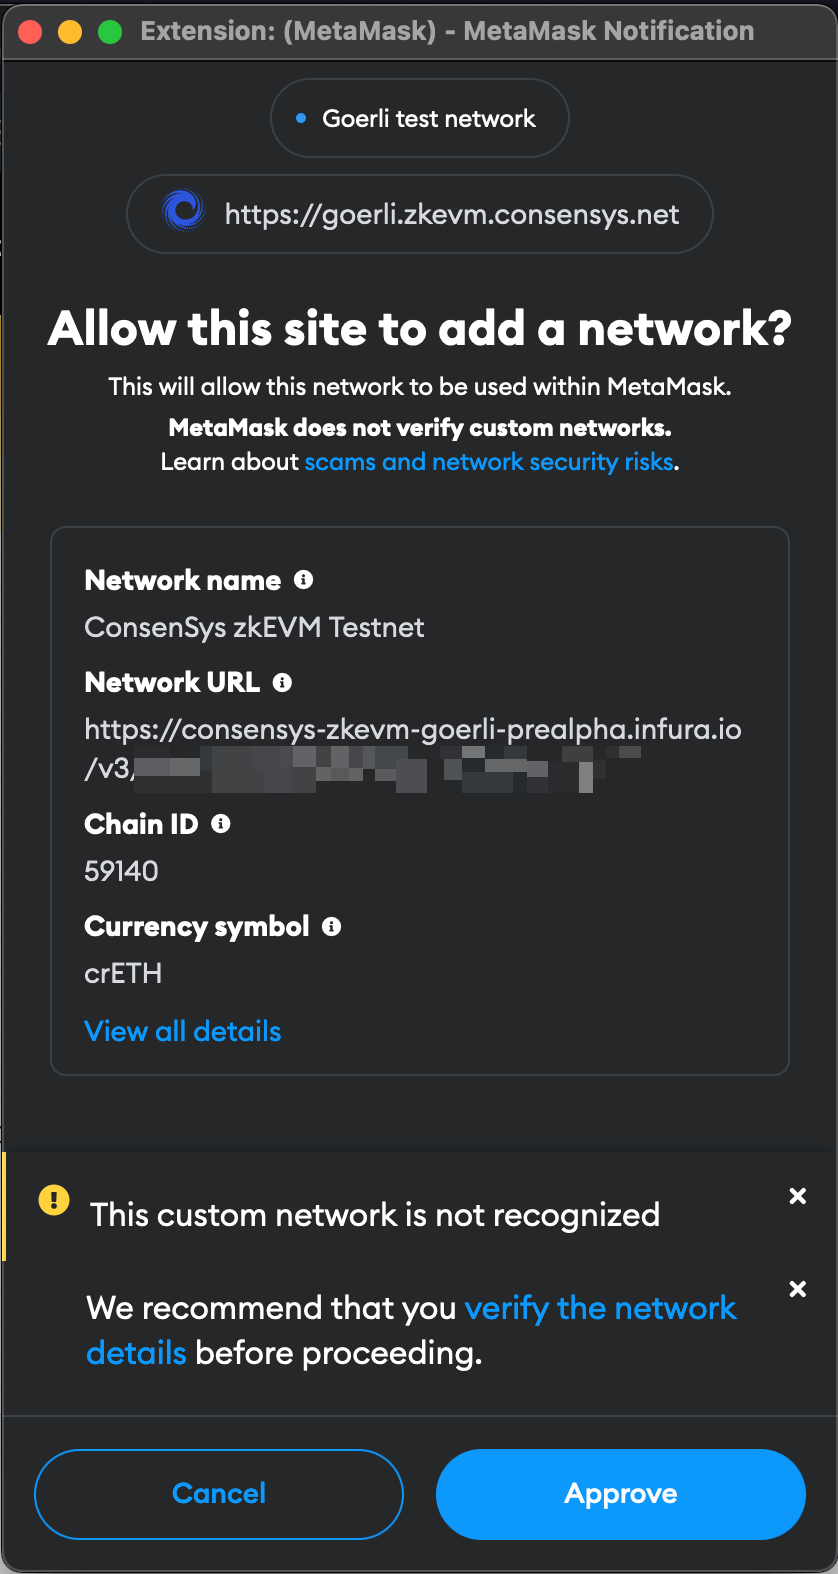 Approve adding network